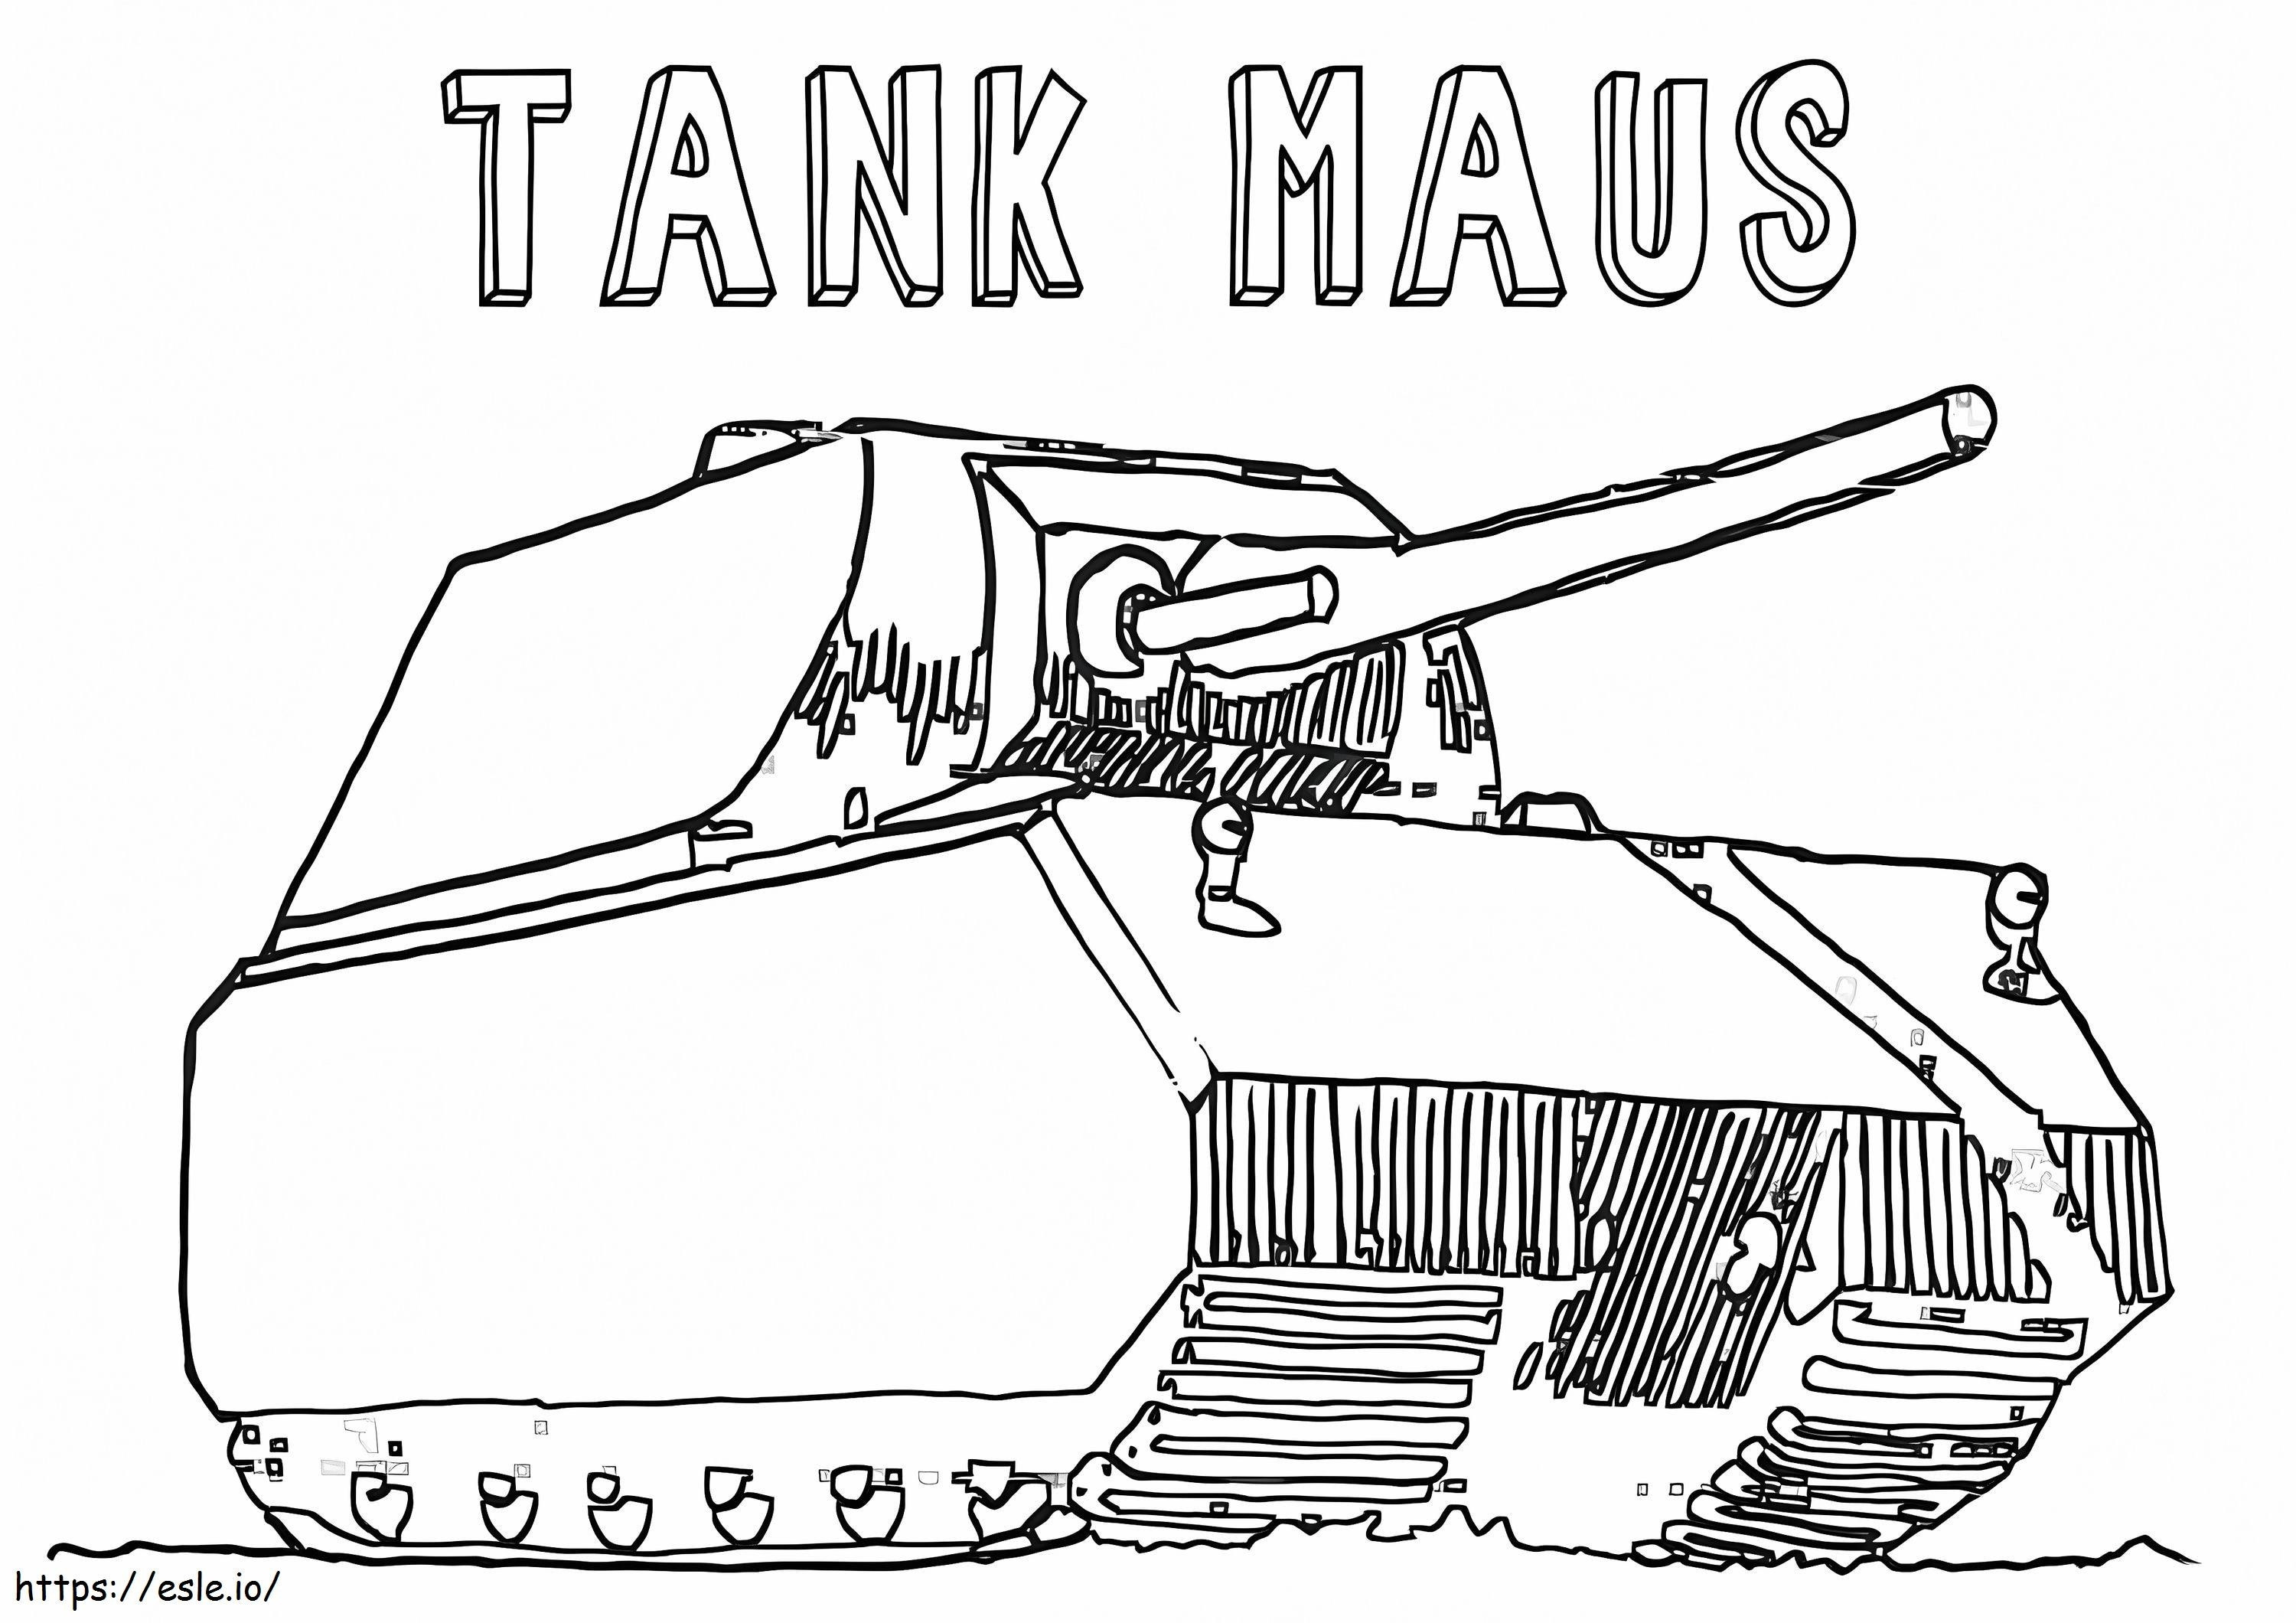 Tank Maus coloring page